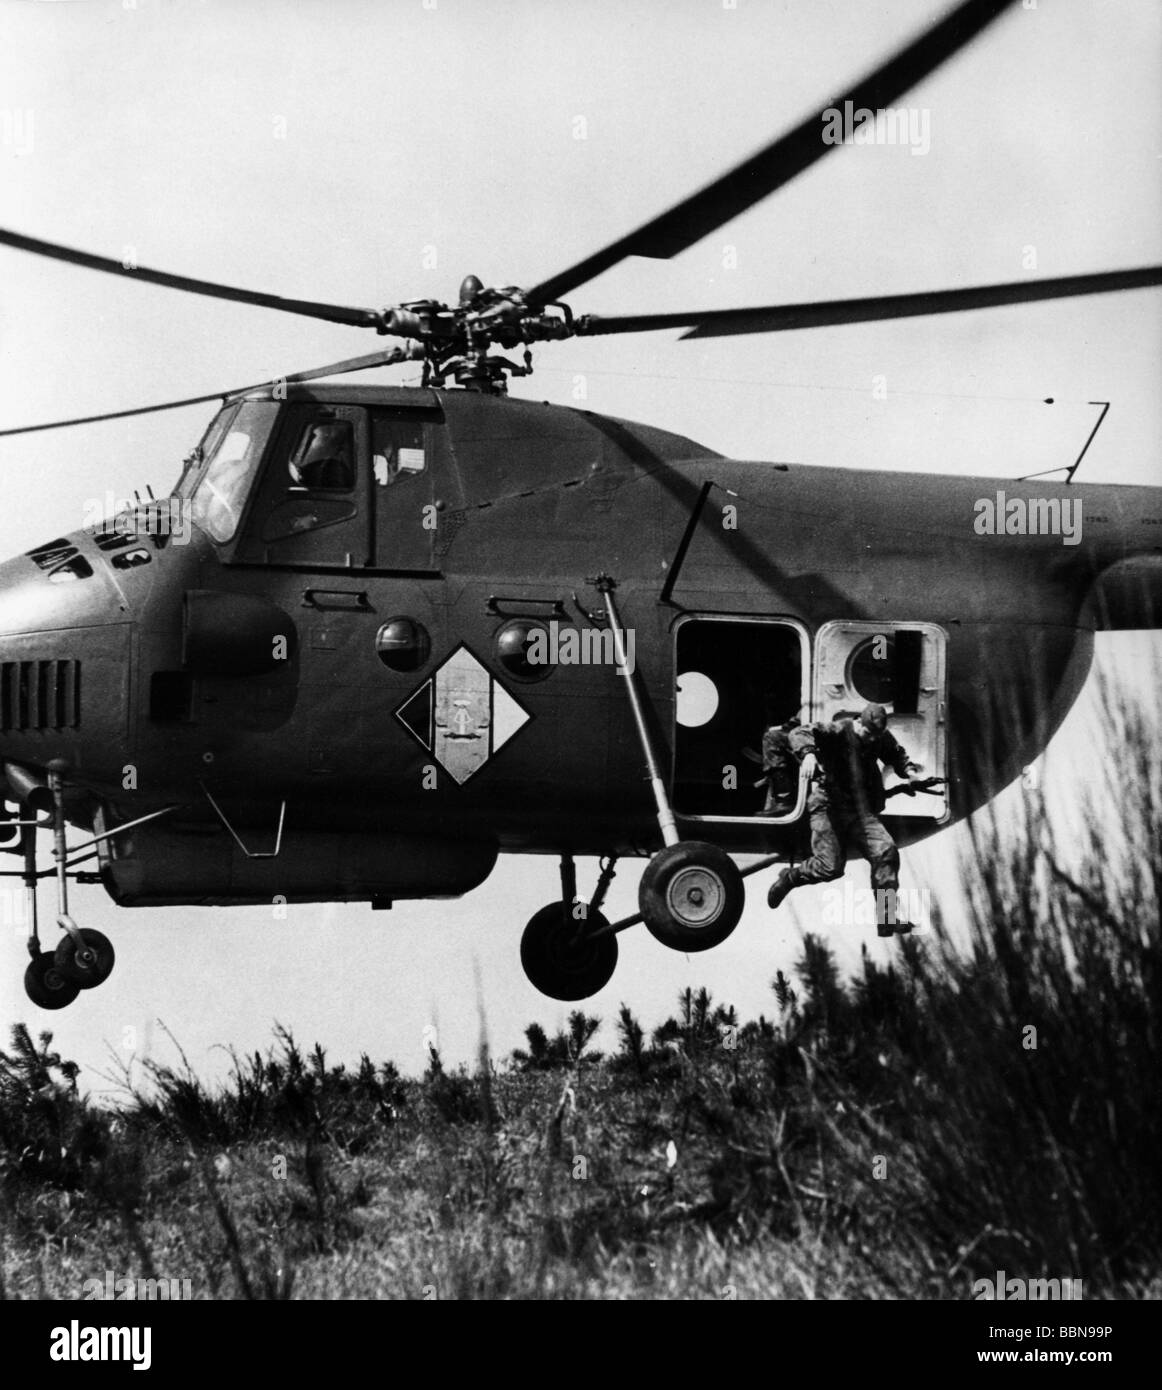 military, East Germany, National People's Army, Land Forces, exercise, soldier of a reconnaissance unit jumping from a helicopter Mil Mi-4 'Hound', 1968, , Stock Photo